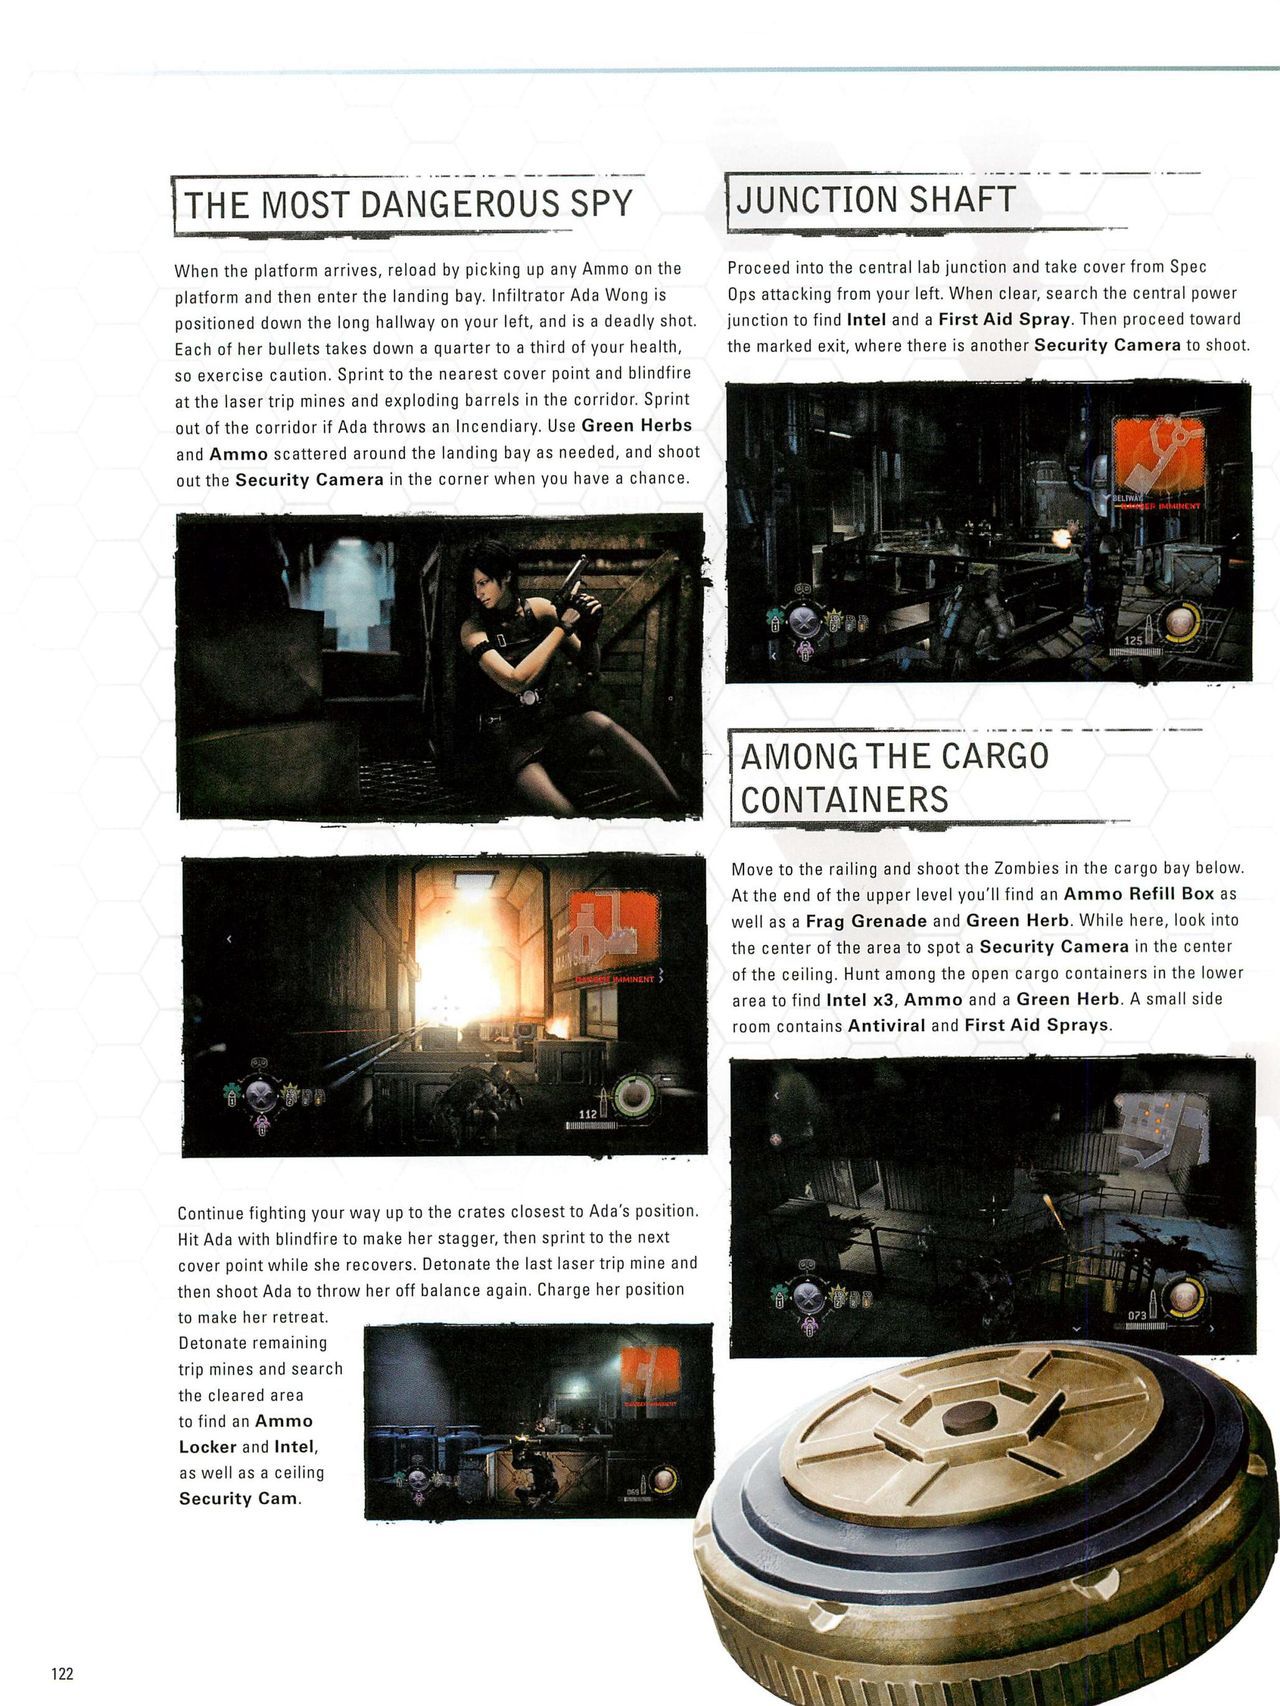 Resident Evil: Operation Raccoon City Official Strategy Guide (watermarked) 124